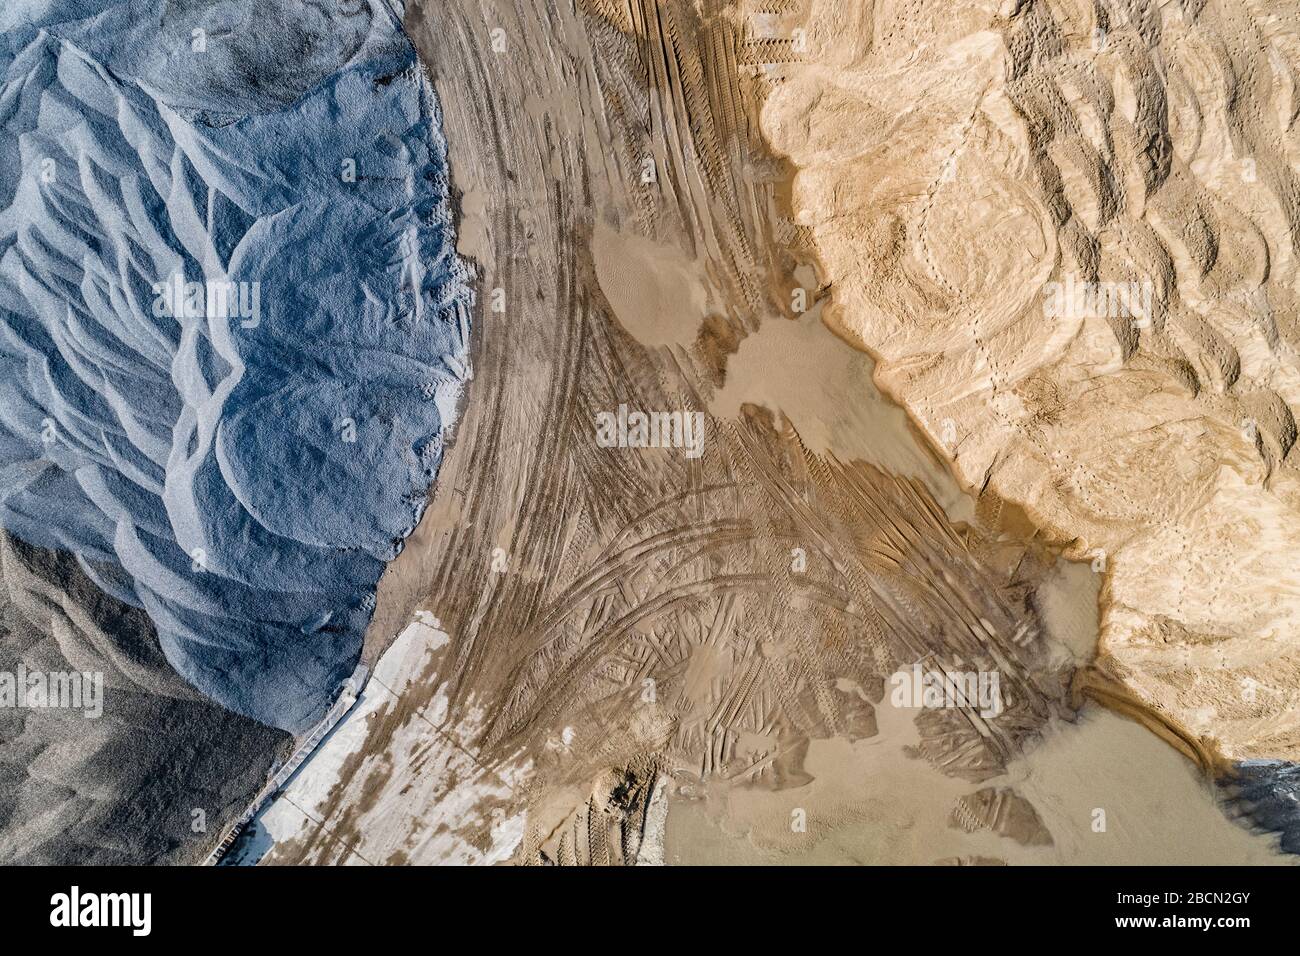 Sand mine, view from above Stock Photo